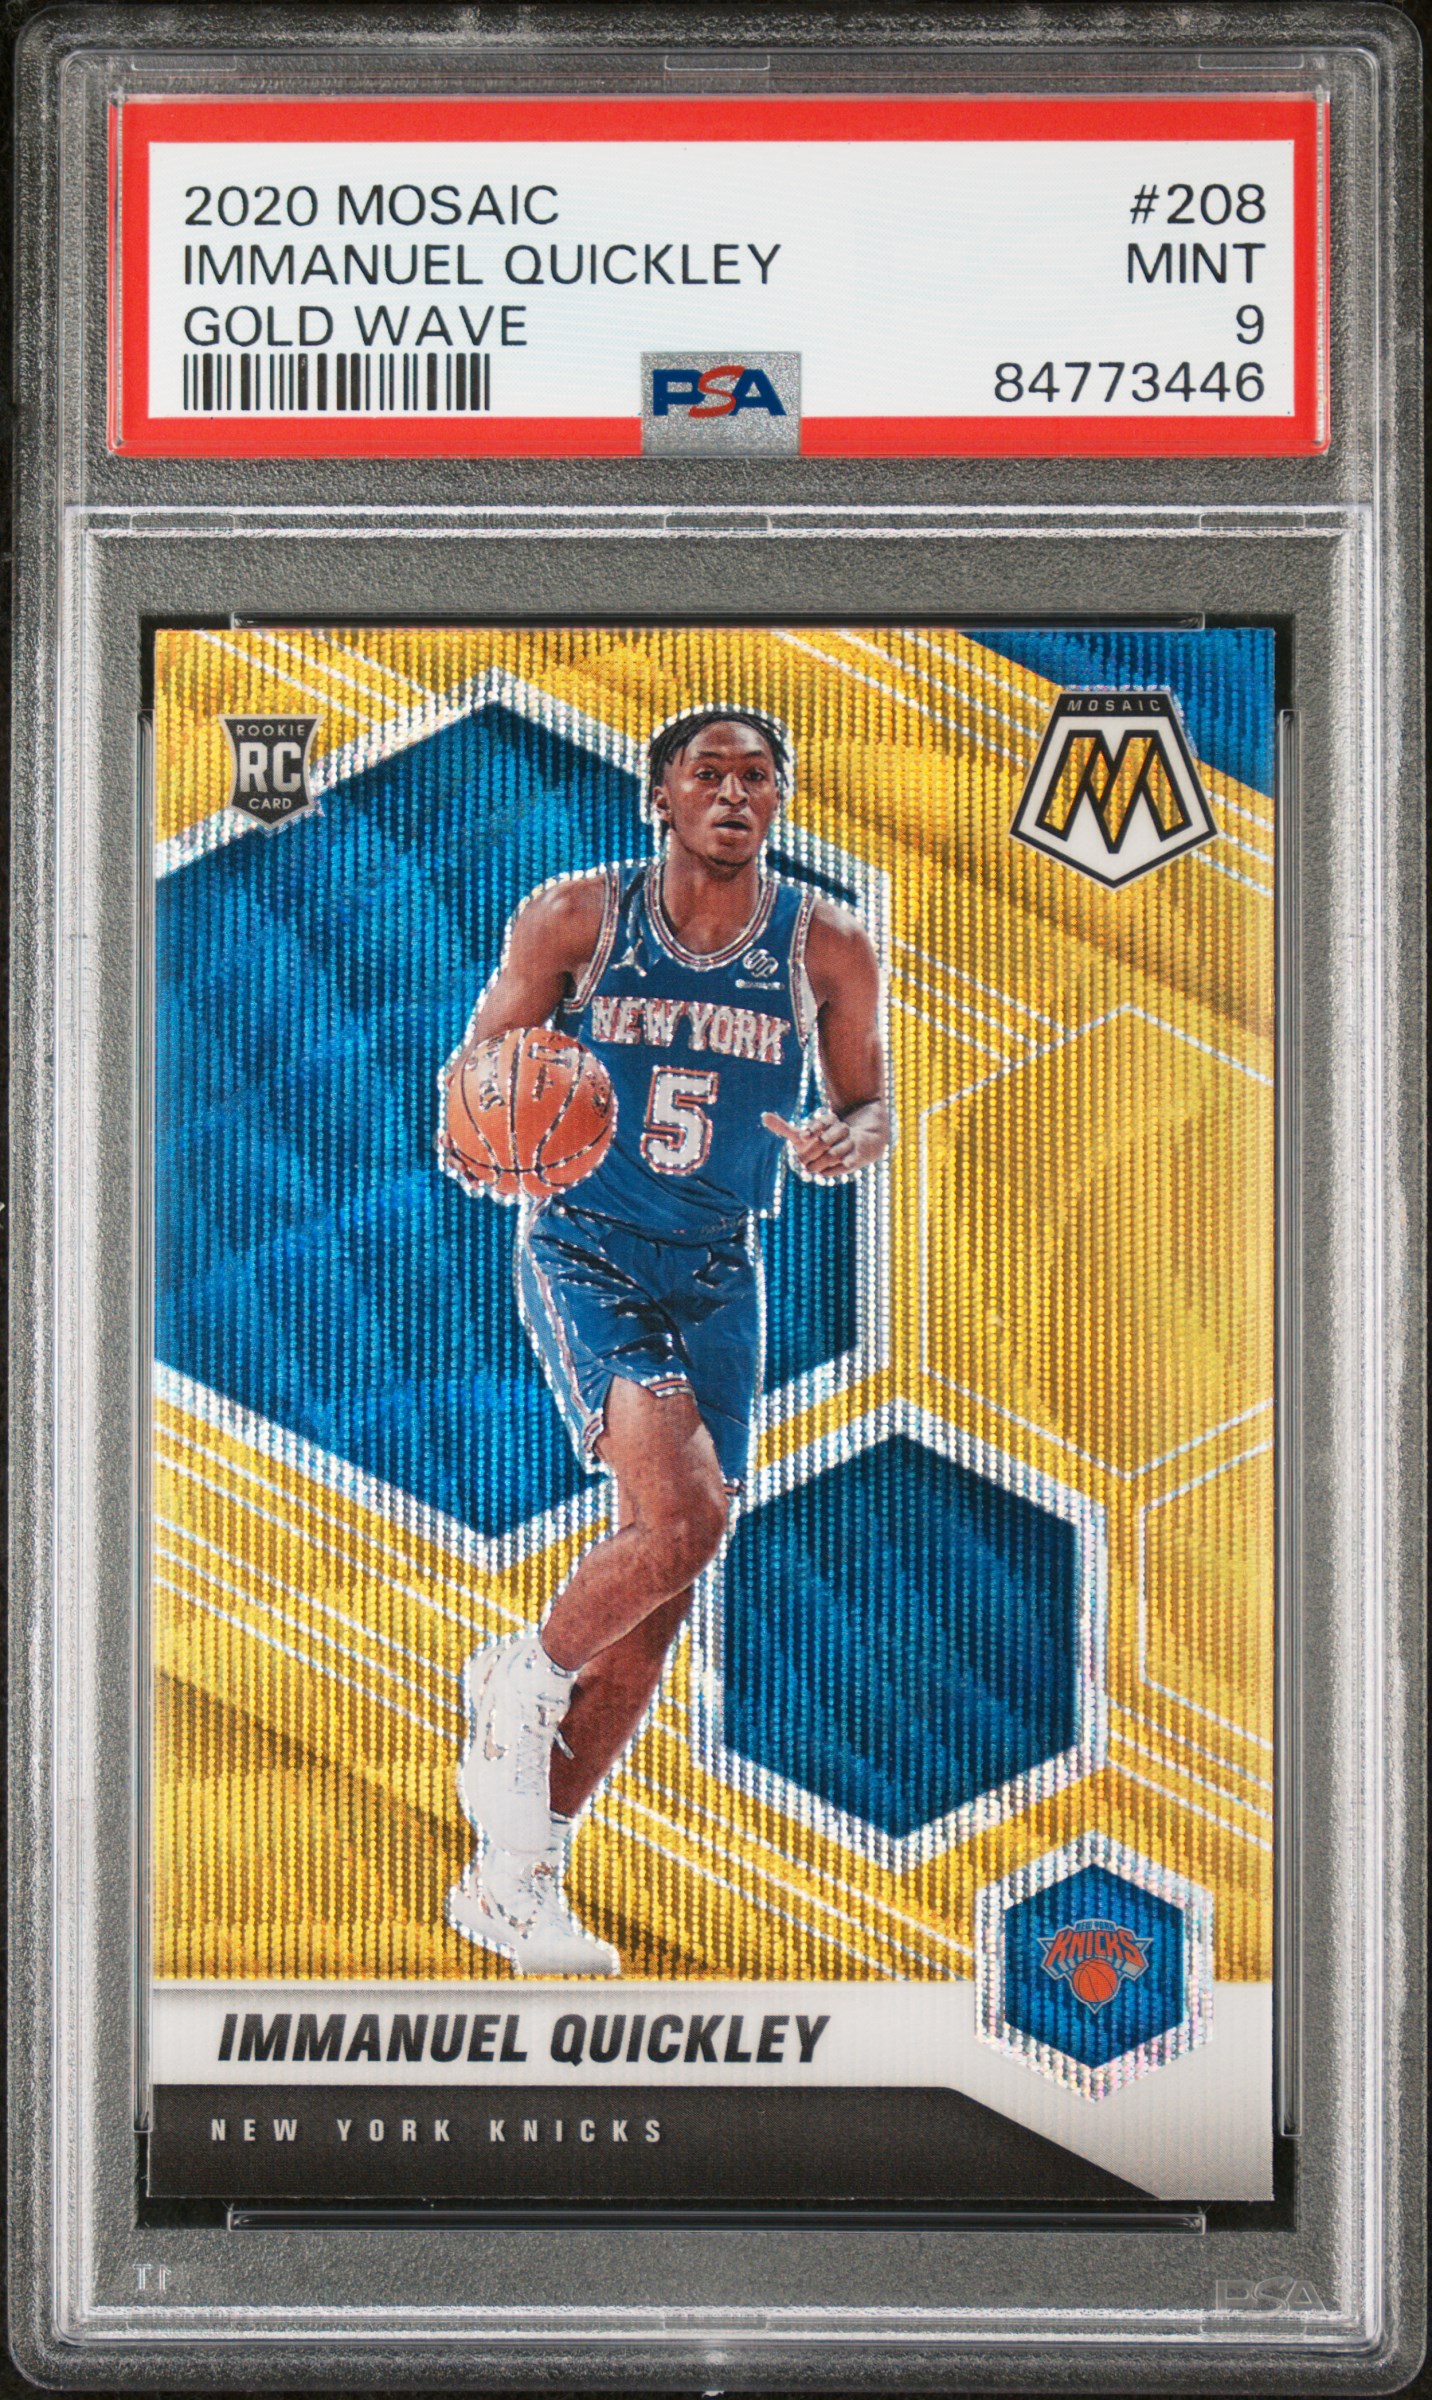 2020-21 Panini Mosaic Gold Wave #208 Immanuel Quickley Rookie Card – PSA MINT 9